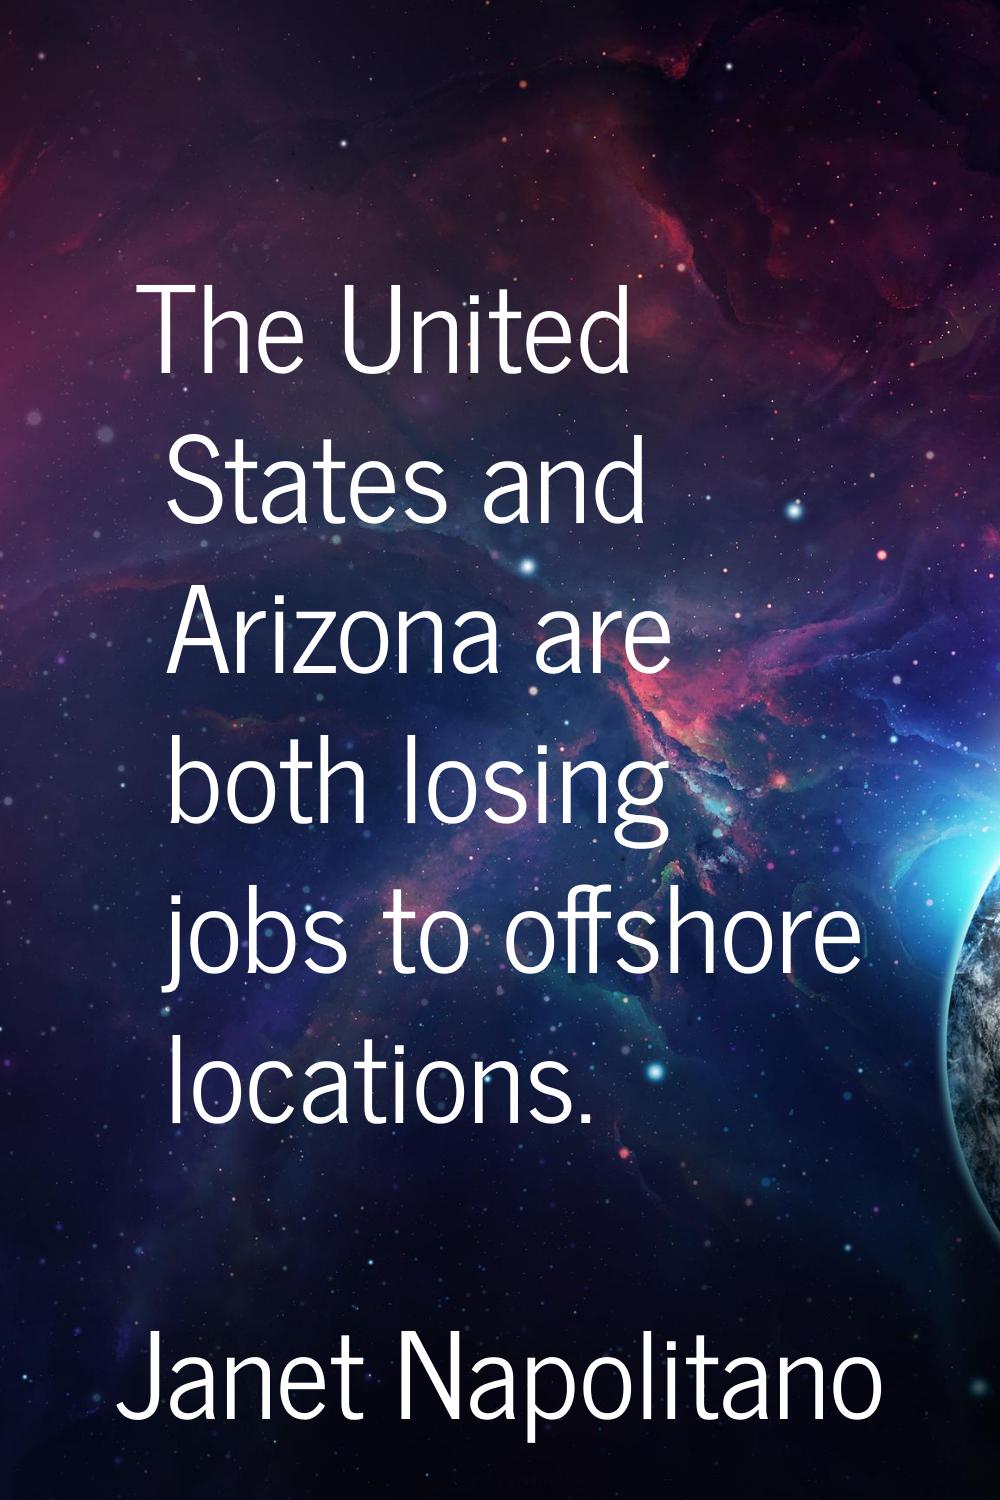 The United States and Arizona are both losing jobs to offshore locations.